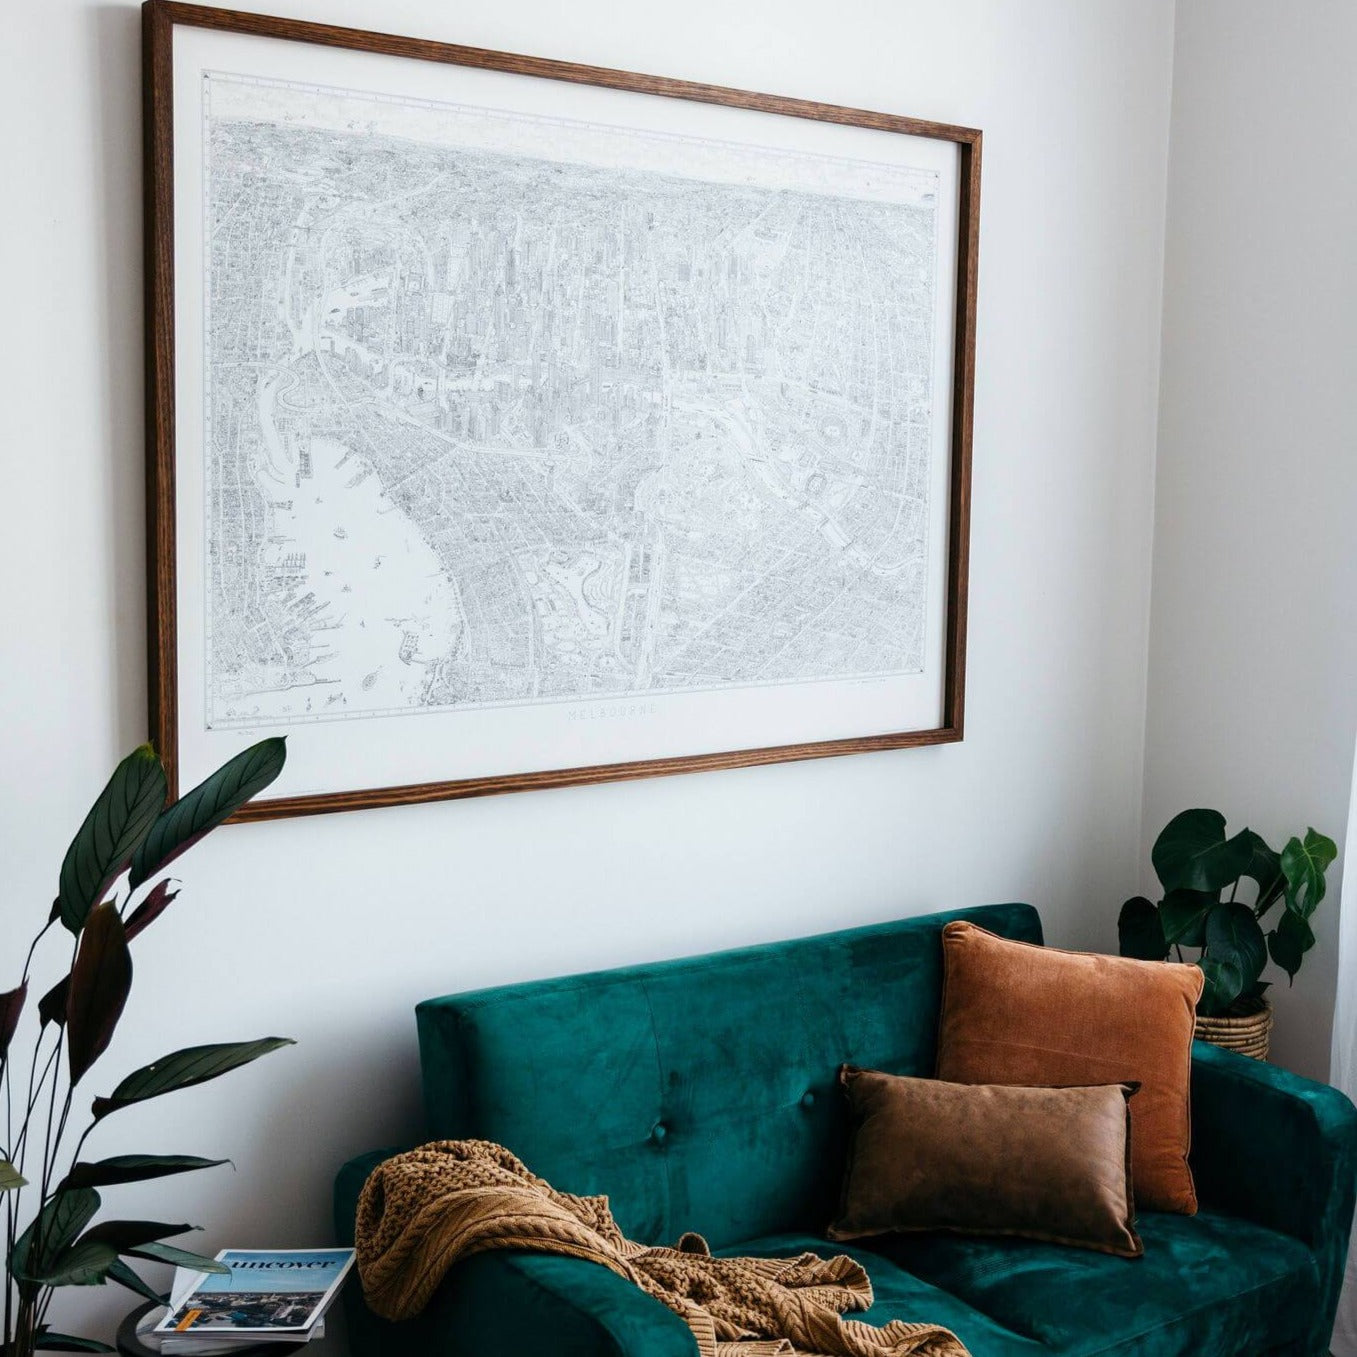 A copy of The Melbourne Map Limited Edition of 300 line drawing framed in stained Victorian Ash. The print is hanging above a small green velvet sofa in a bright airy room